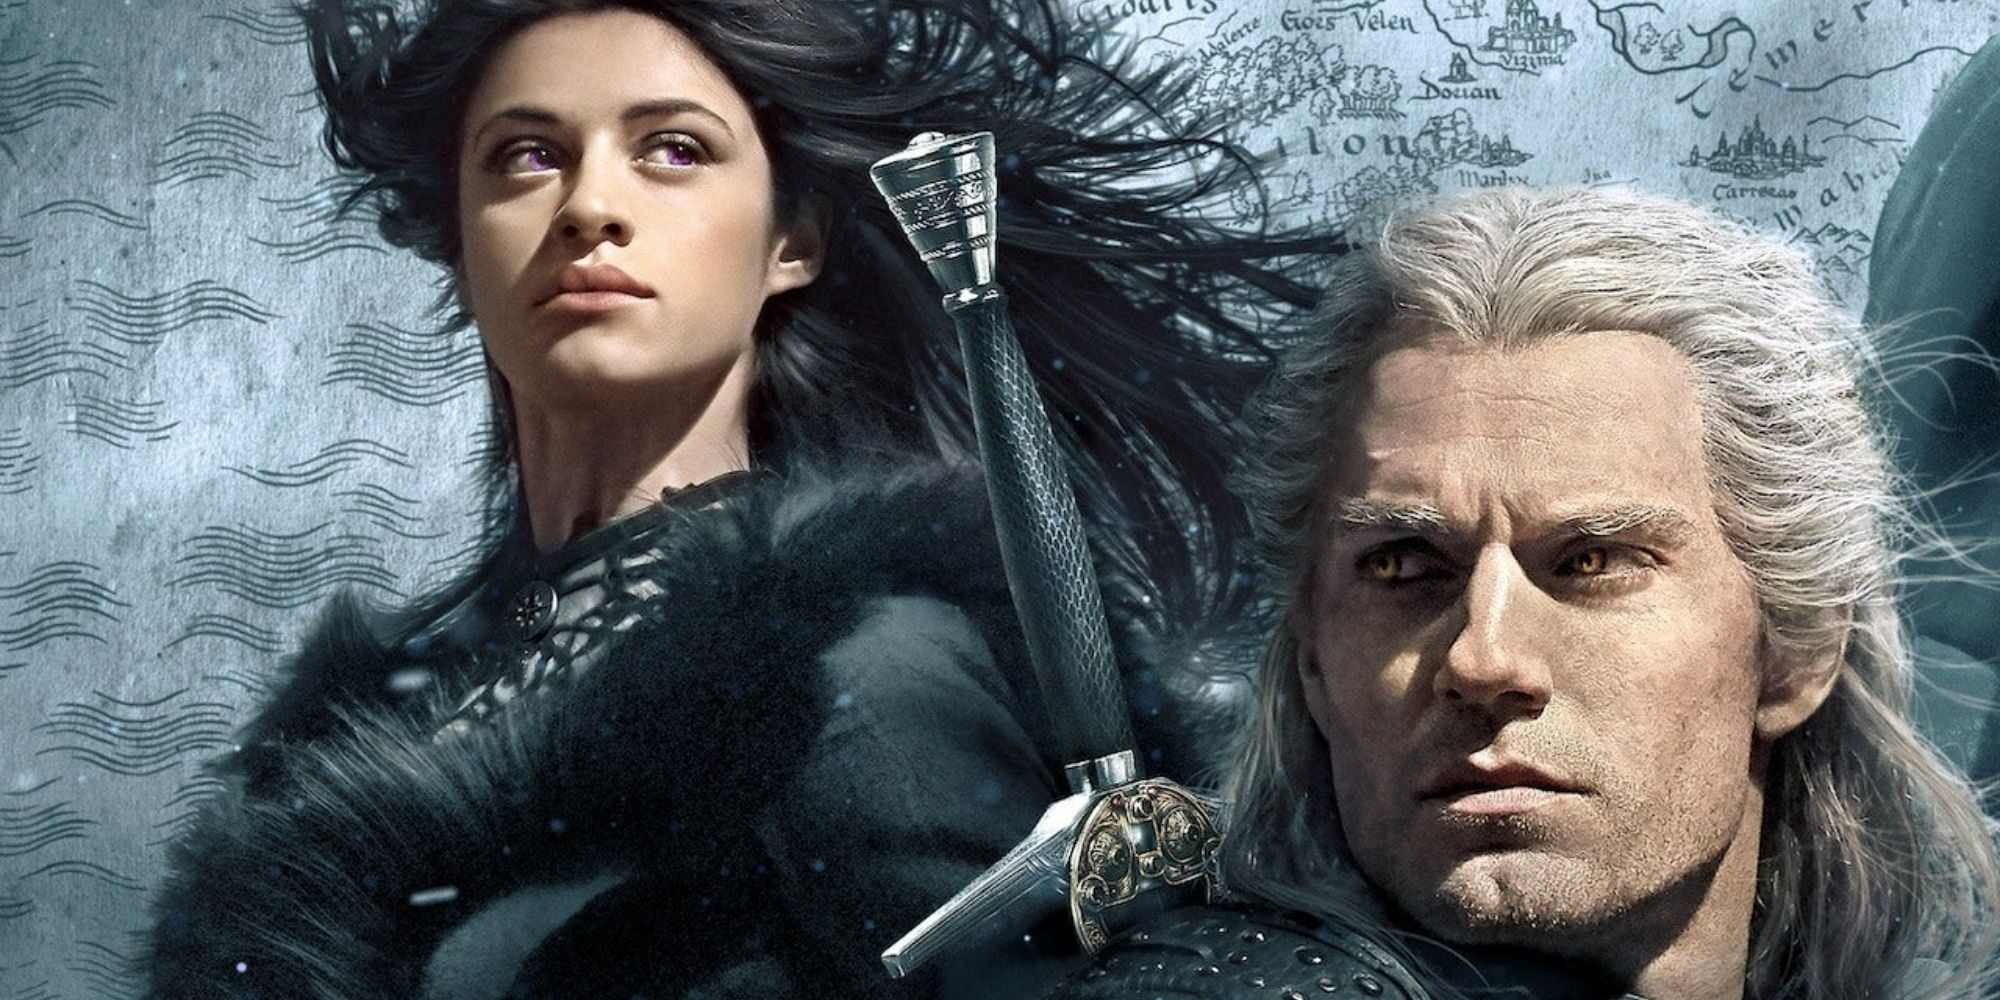 Geralt and Yennefer in The Witcher